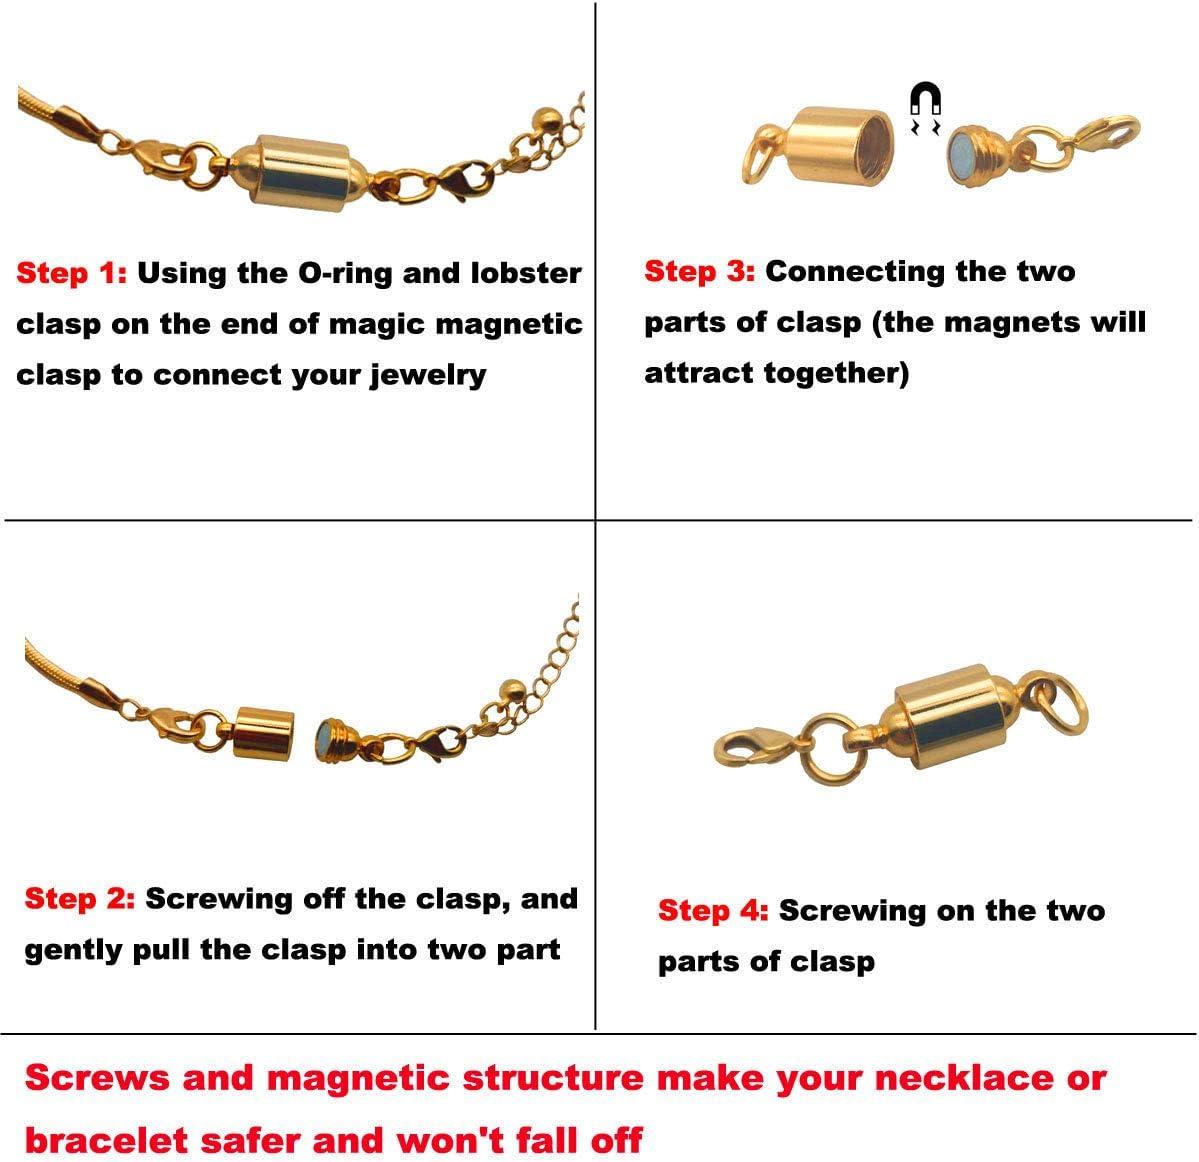 Magnetic Jewelry Clasps  How it works, Application & Advantages